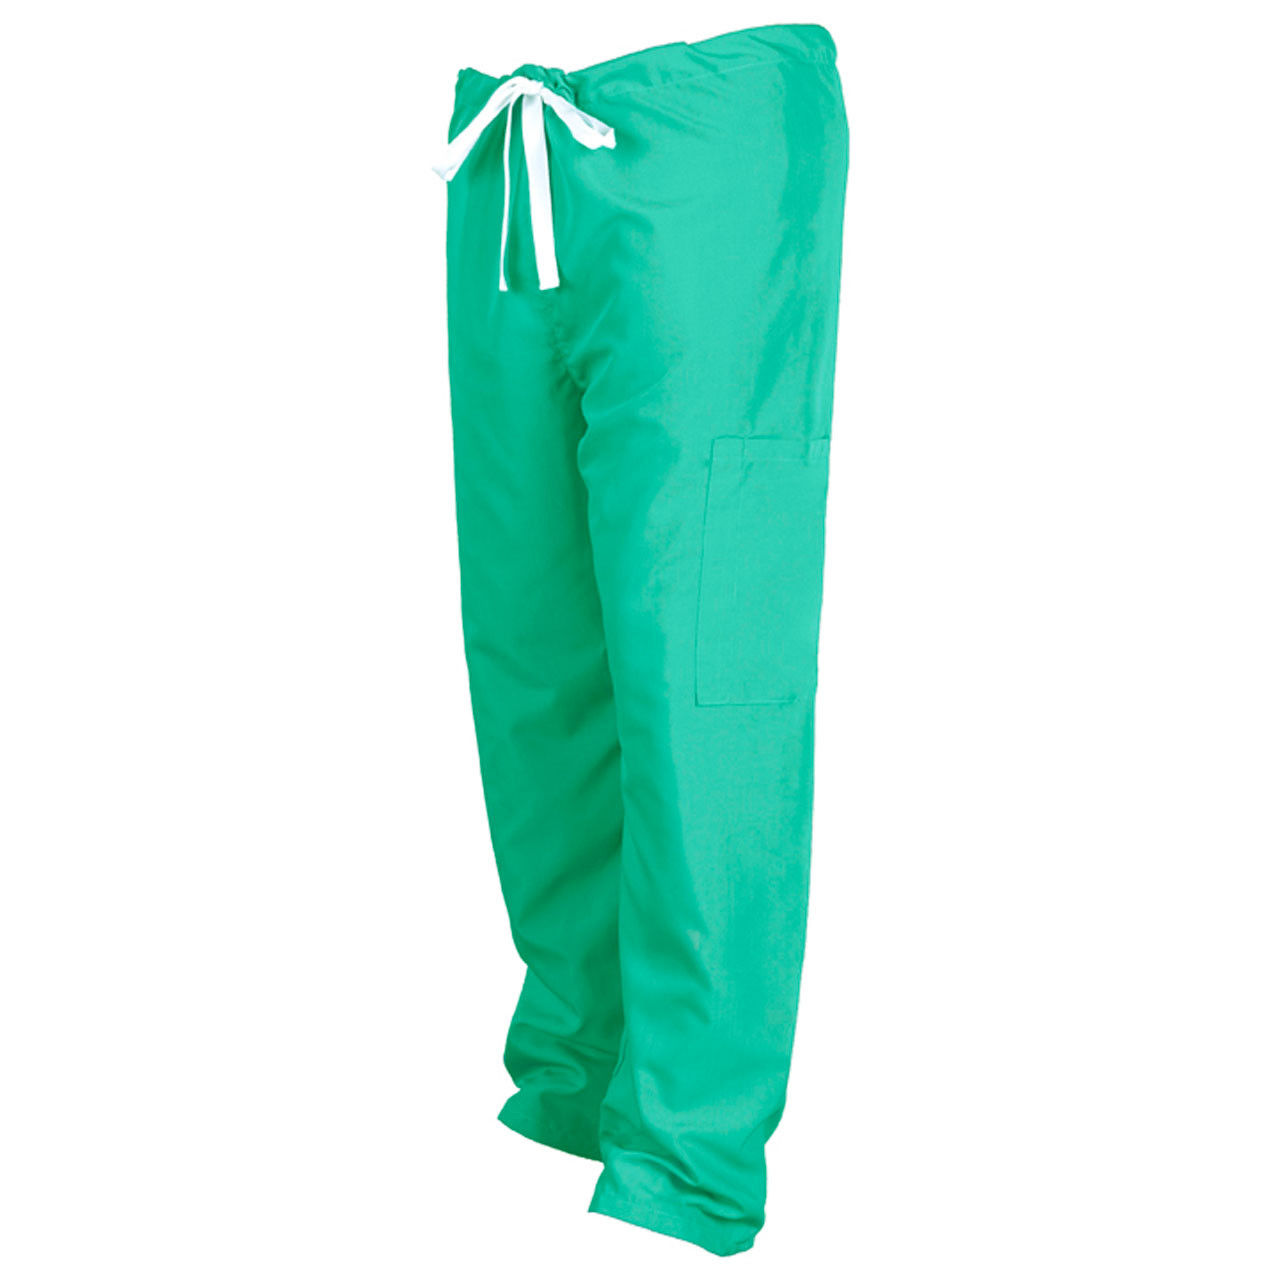 What is the common use for these cargo scrub pants?